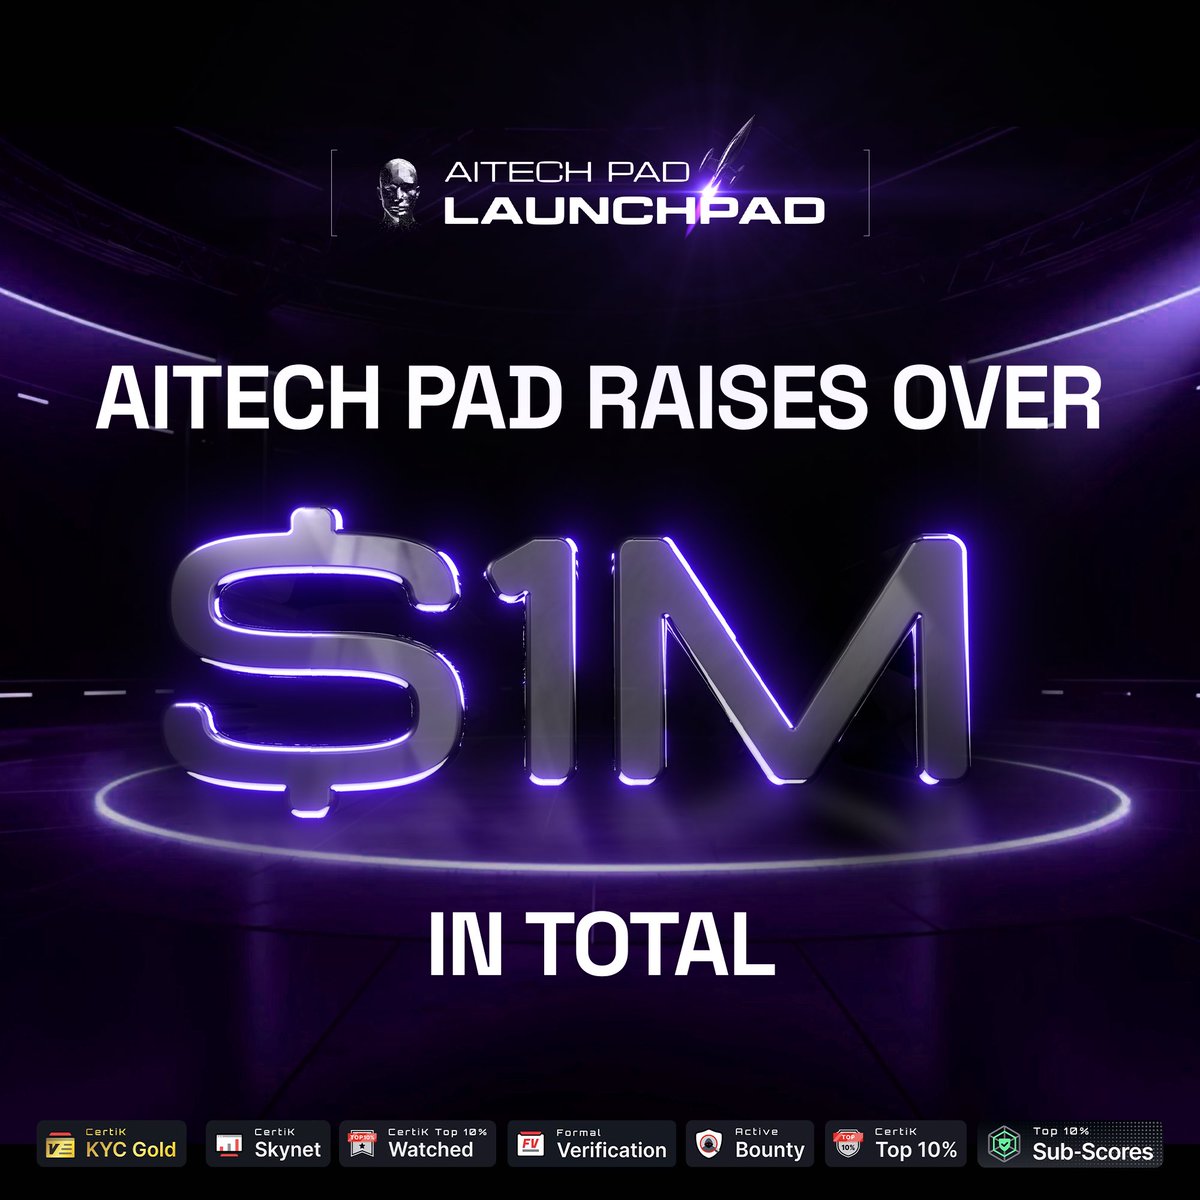 🔥AITECH Pad Raises over $1M in Total! 🎉 We're excited to share that AITECH Pad has raised over $1 million in funds to support 9 Web3 projects, propelling them towards TGE and continued development. ➡️ Learn More: aitechpad.io